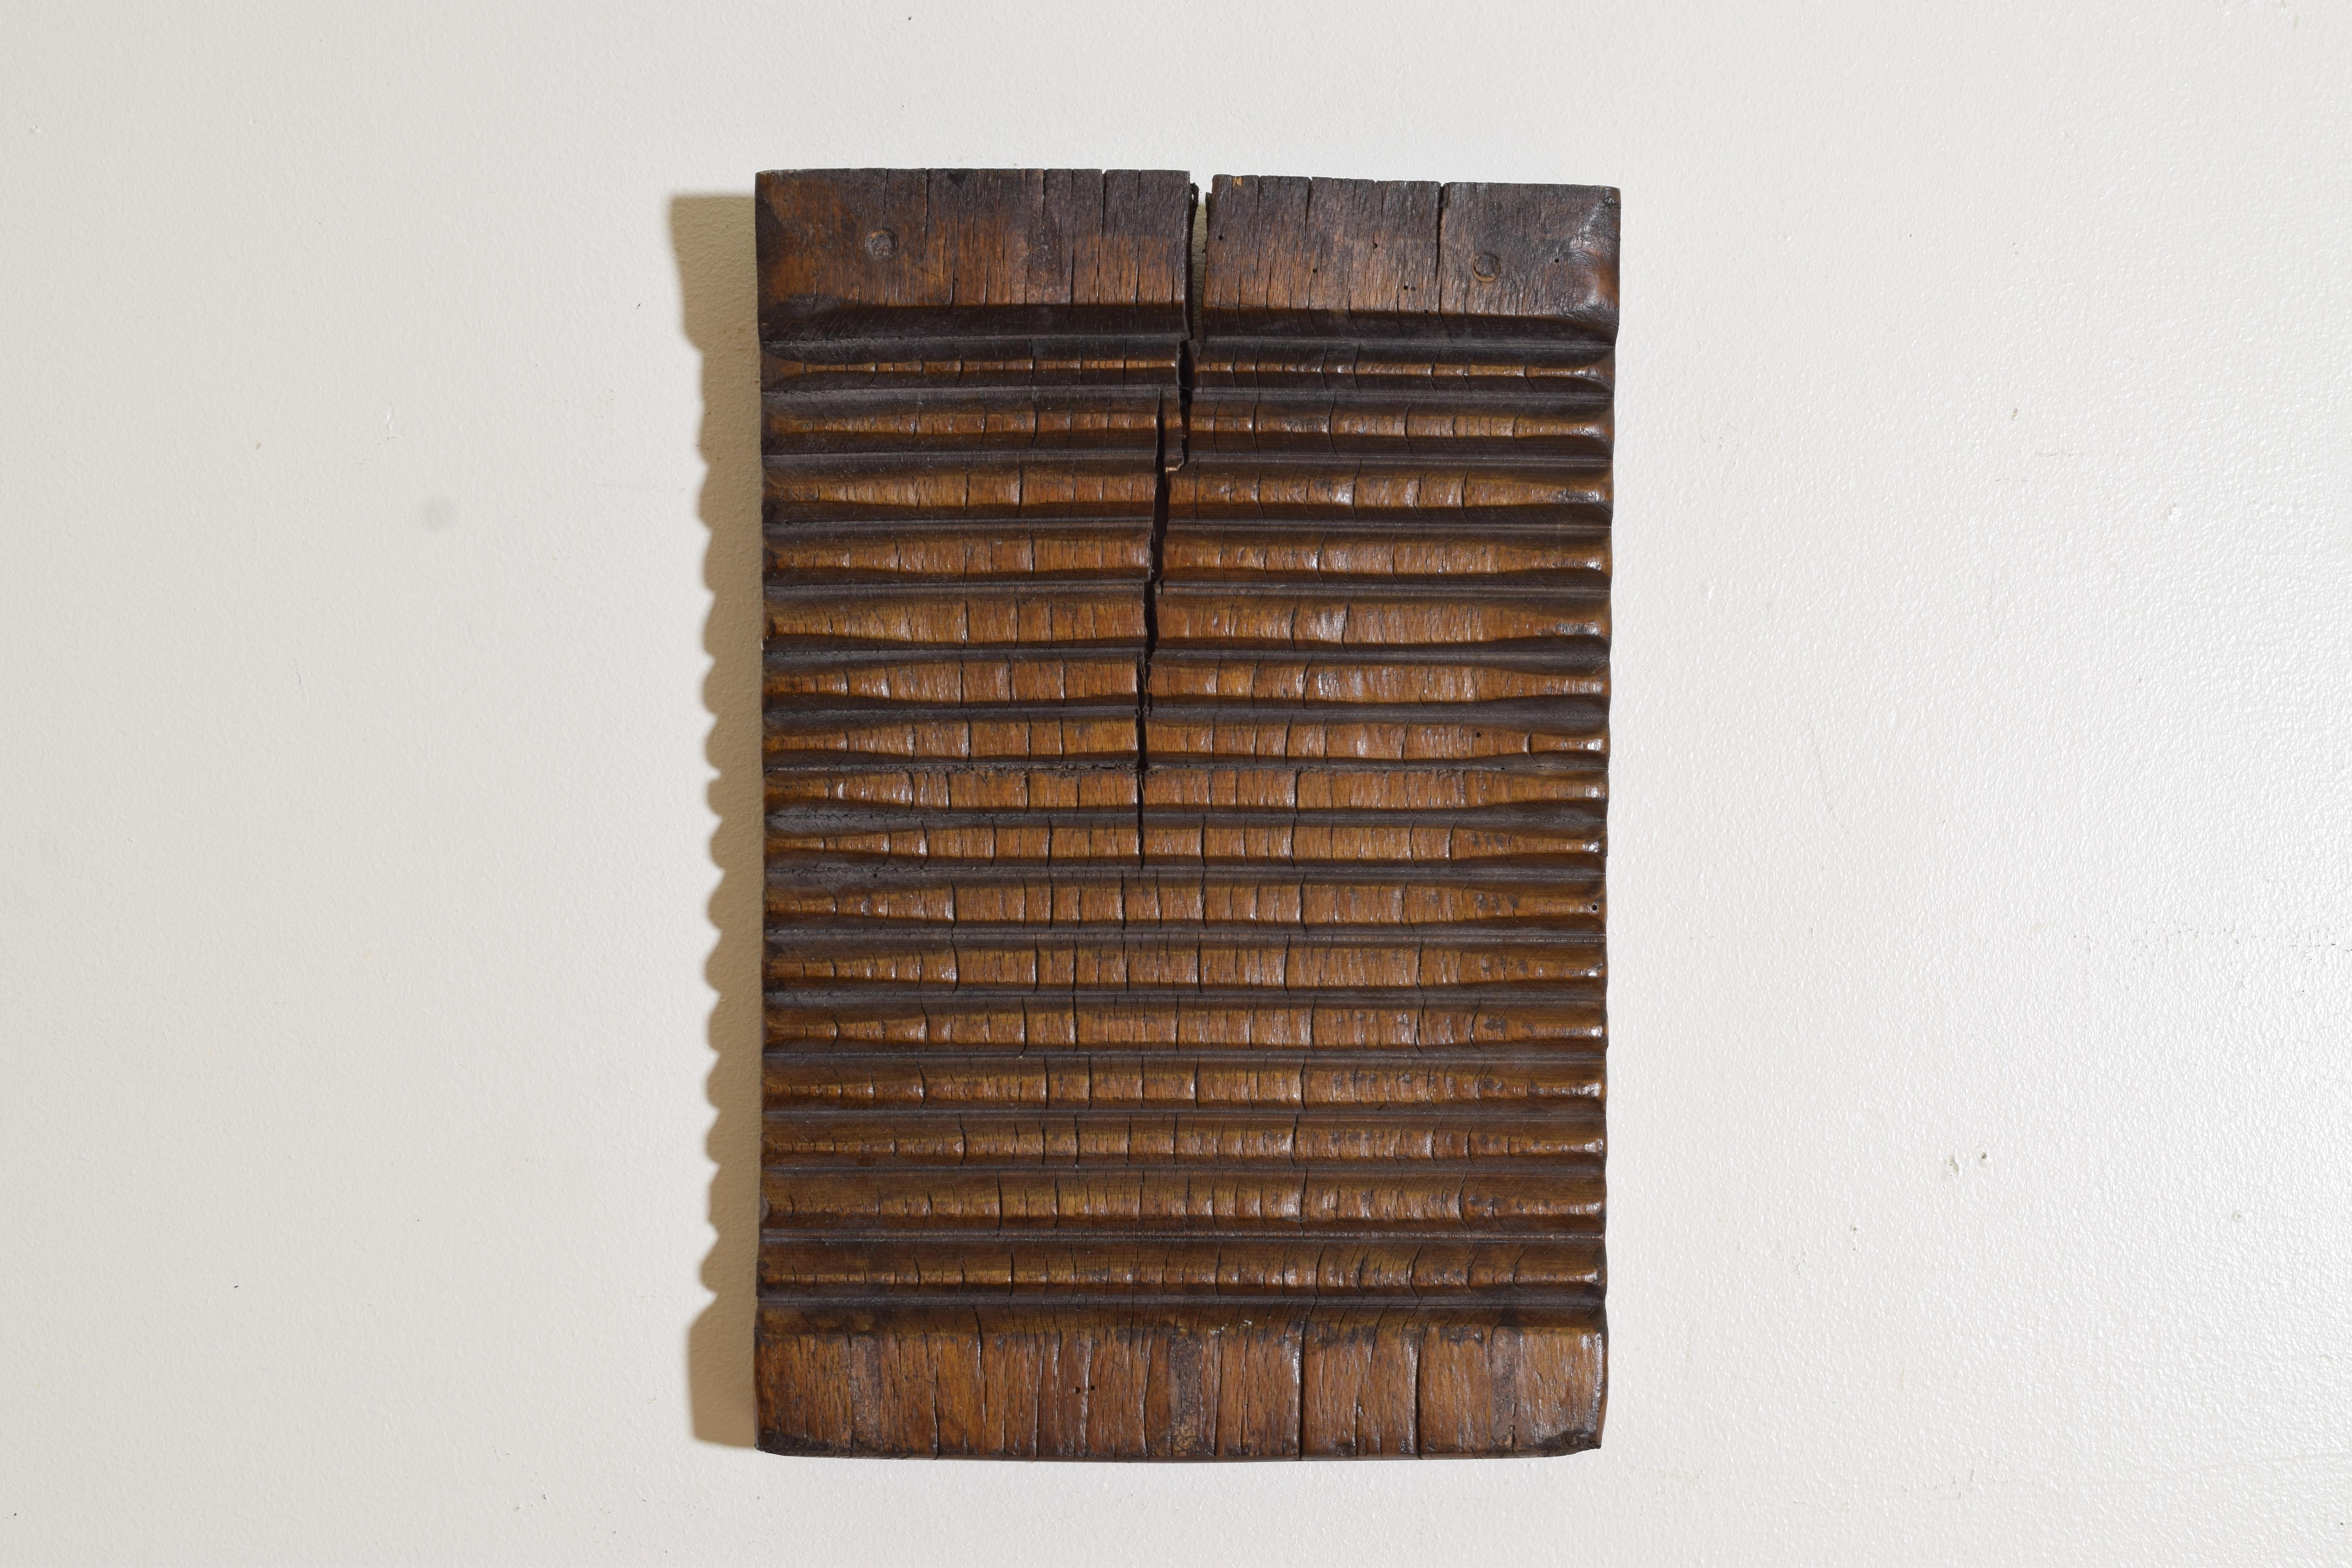 Hand carved in walnut this well worn washboard utilizes both its sides, now best admired as a wall hanging